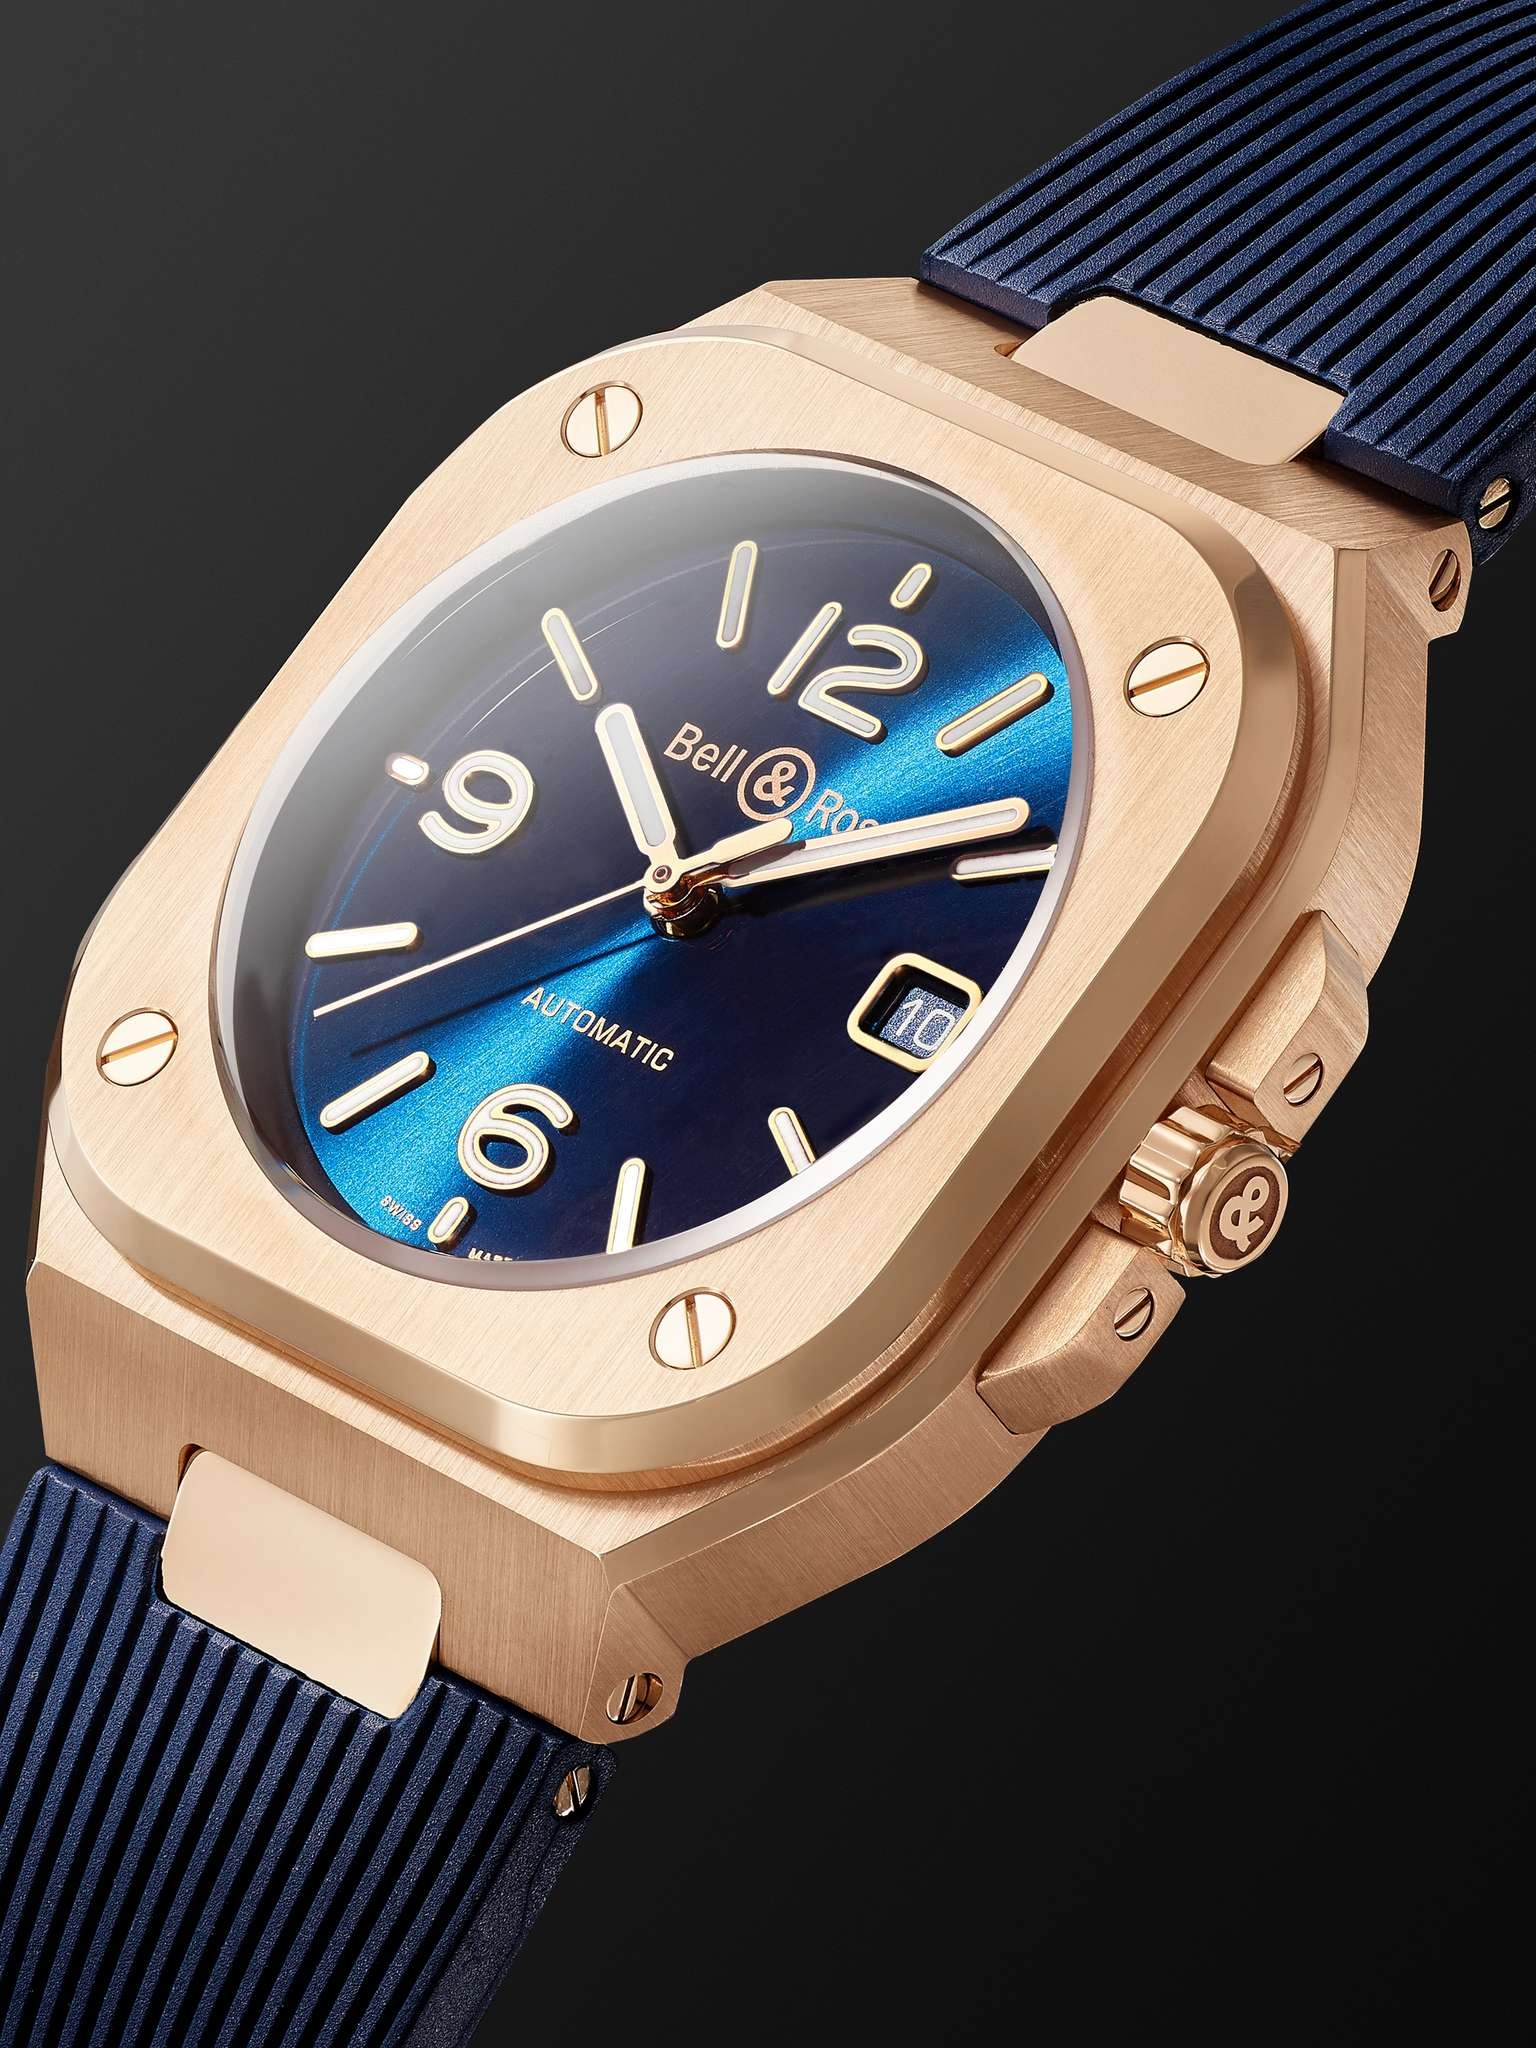 BR 05 Blue Gold Automatic 40mm 18-Karat Rose Gold and Rubber Watch, Ref. No. BR05A-BLU-PG/SRB - 4